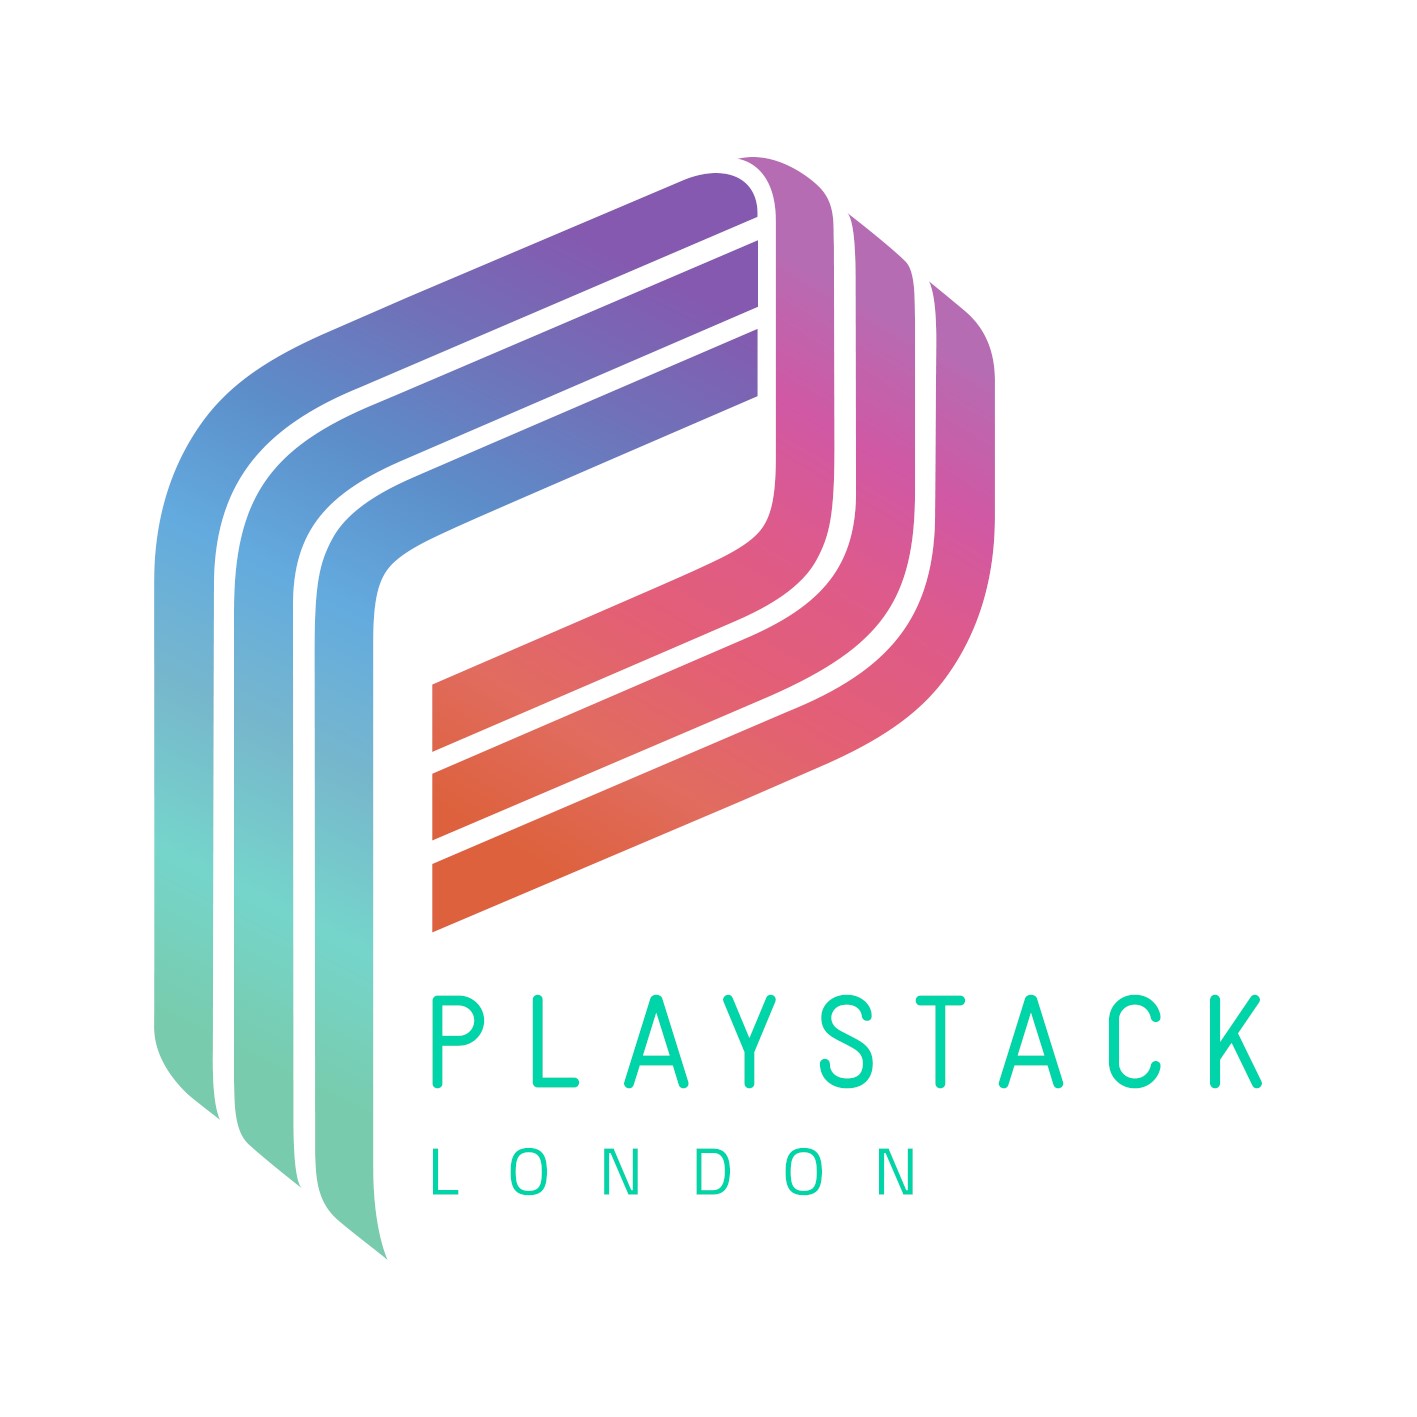 Playstack releases its fastest selling game